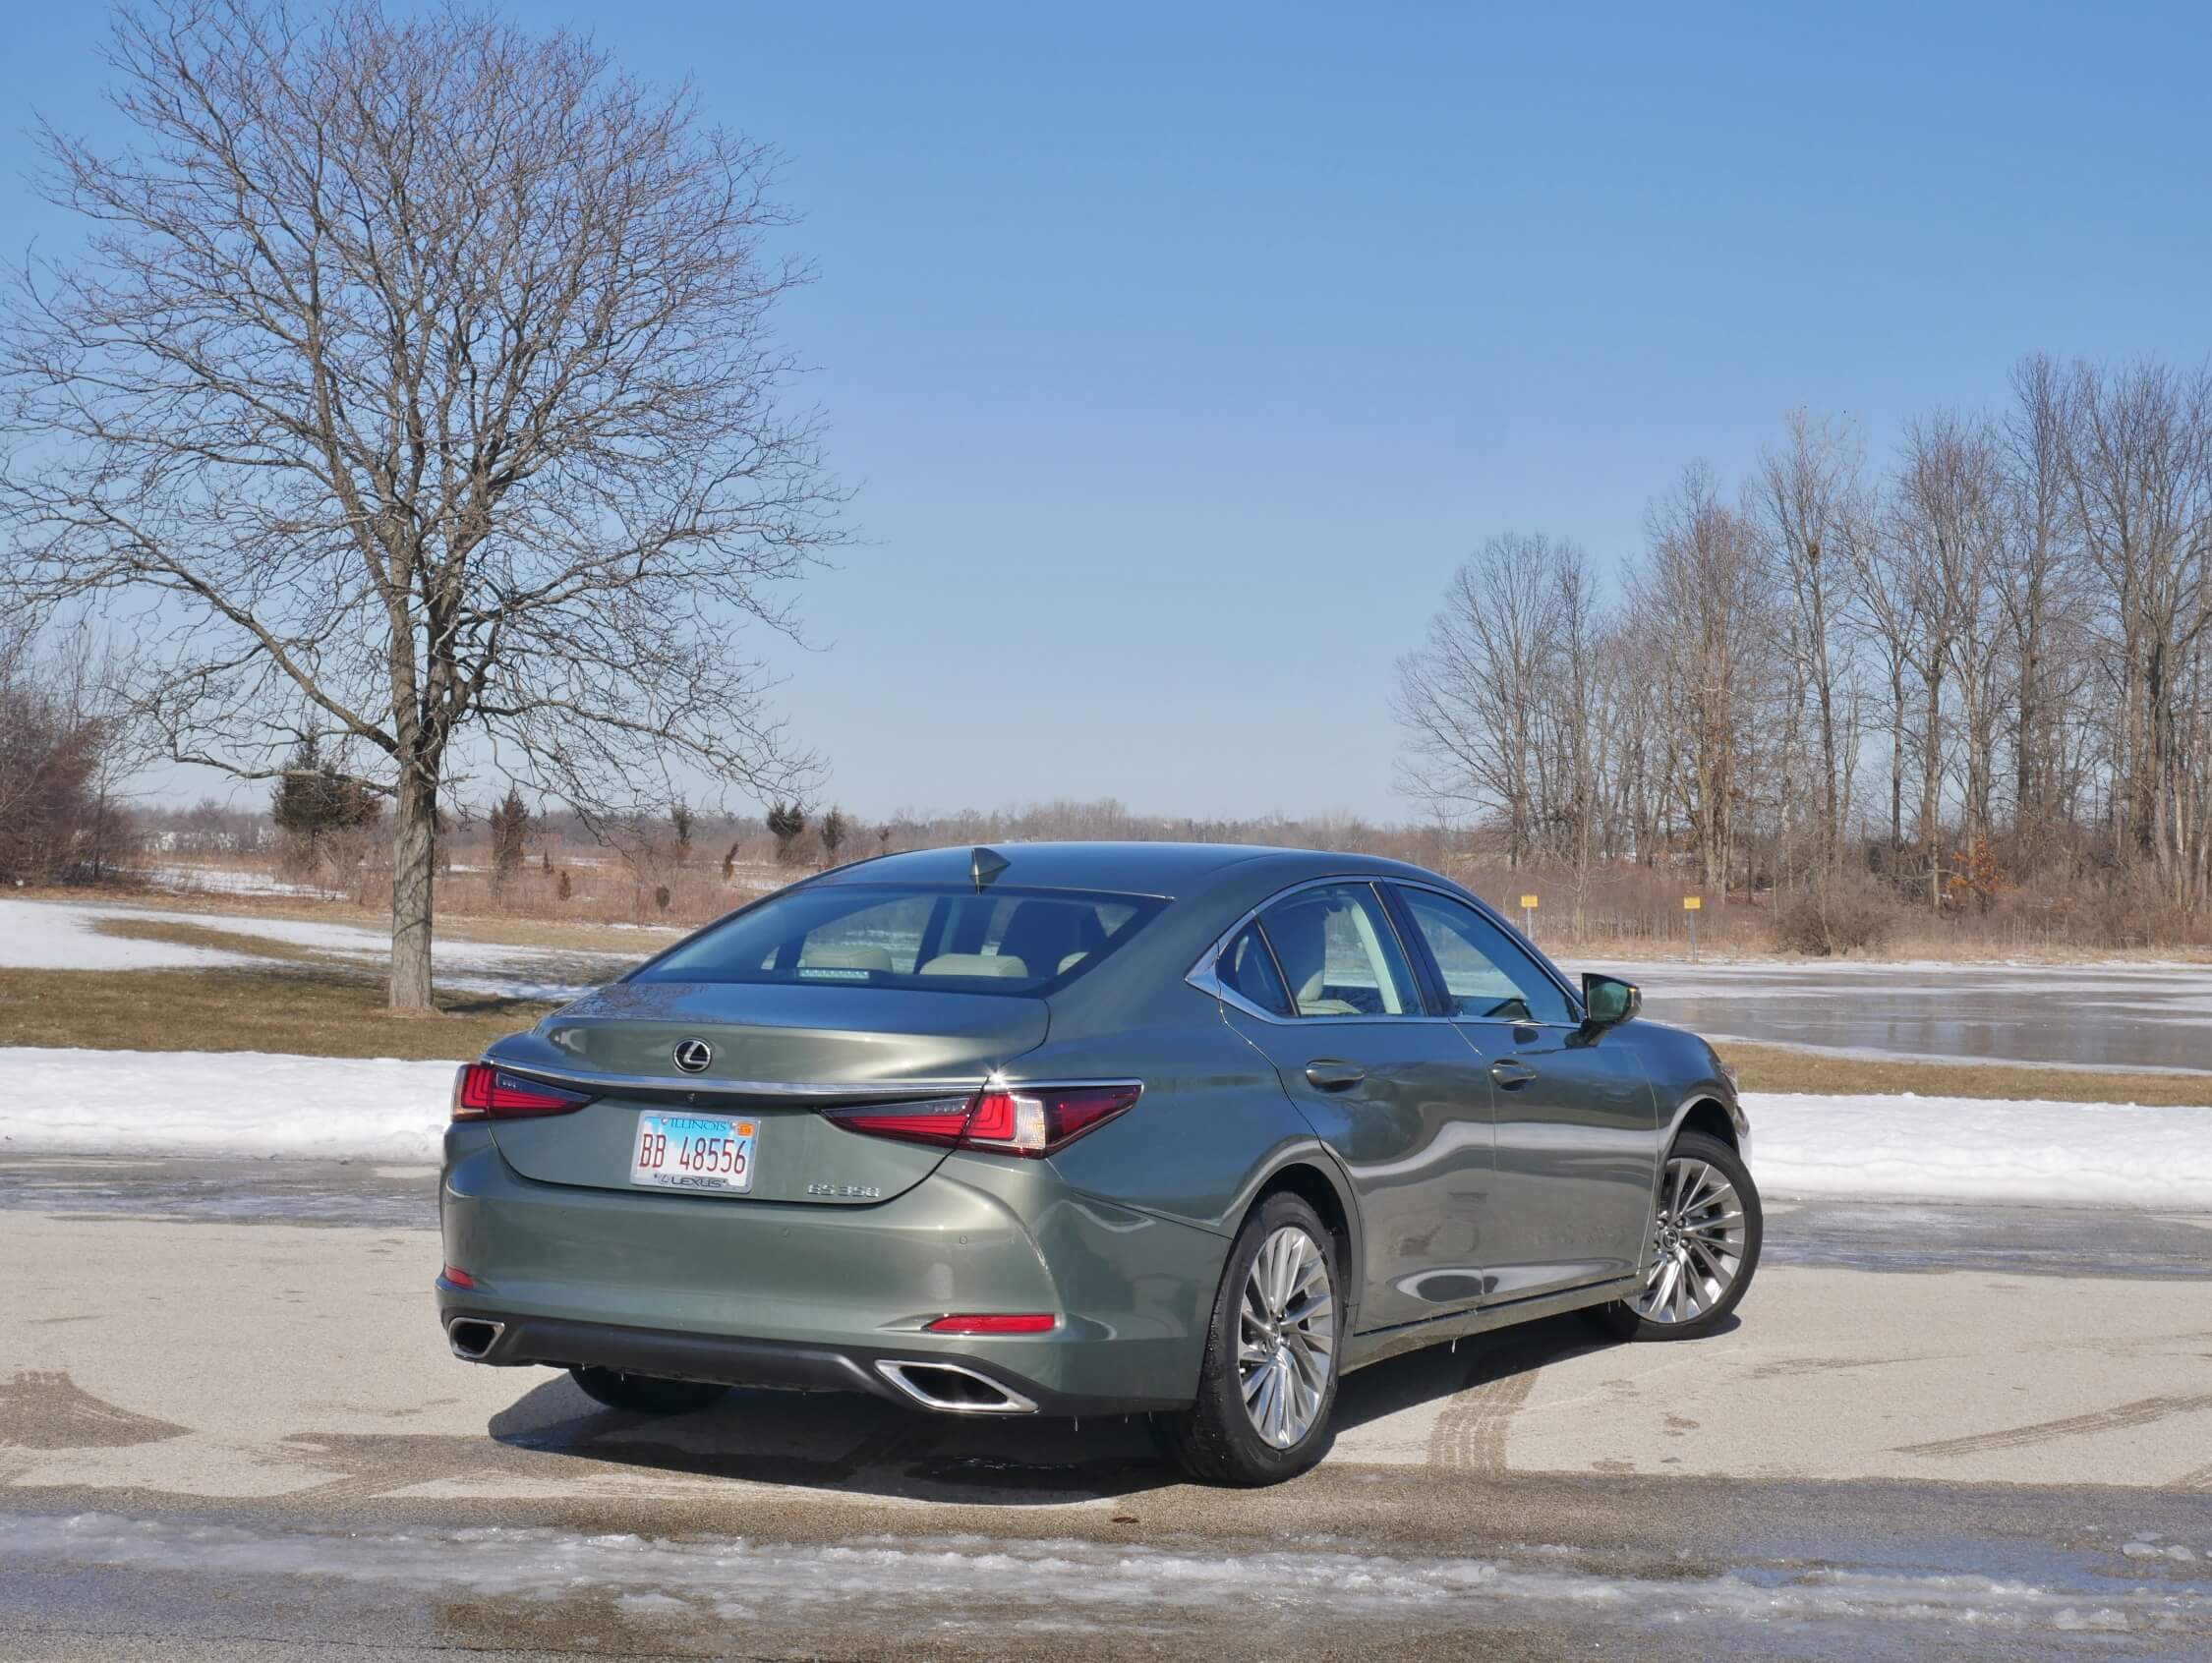 2019 Lexus ES 350: Modern times bring a more cinched tail, revised dual "L" wrap-around taillamps and trapezoidal dual exhaust outlets.